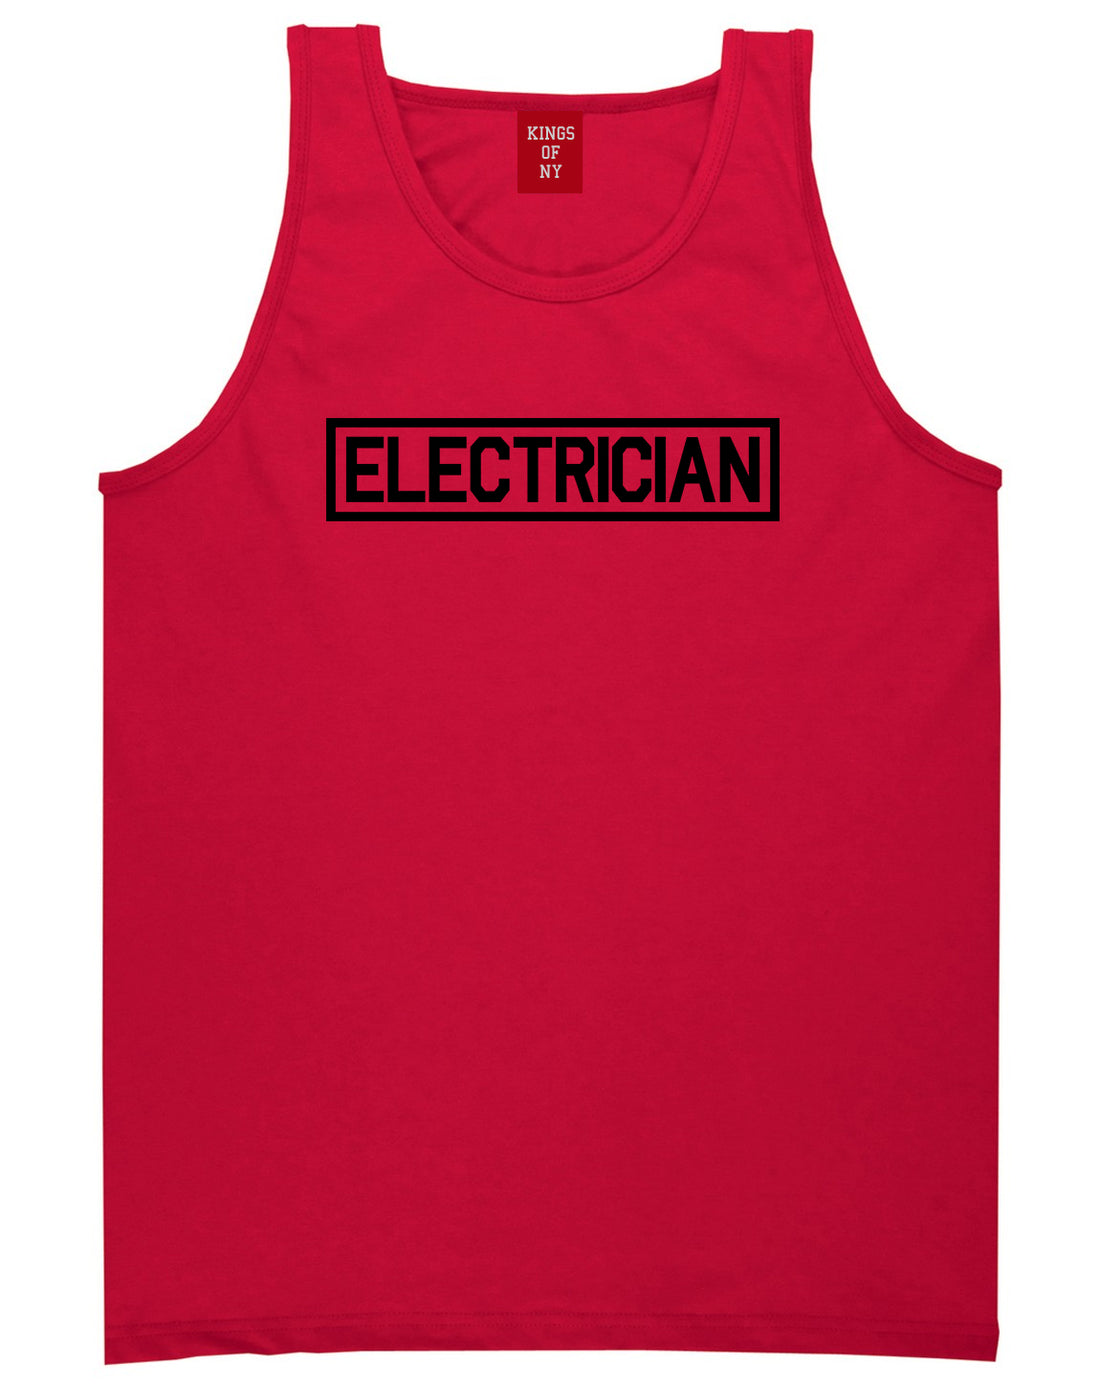 Electrician_Occupation Mens Red Tank Top Shirt by Kings Of NY